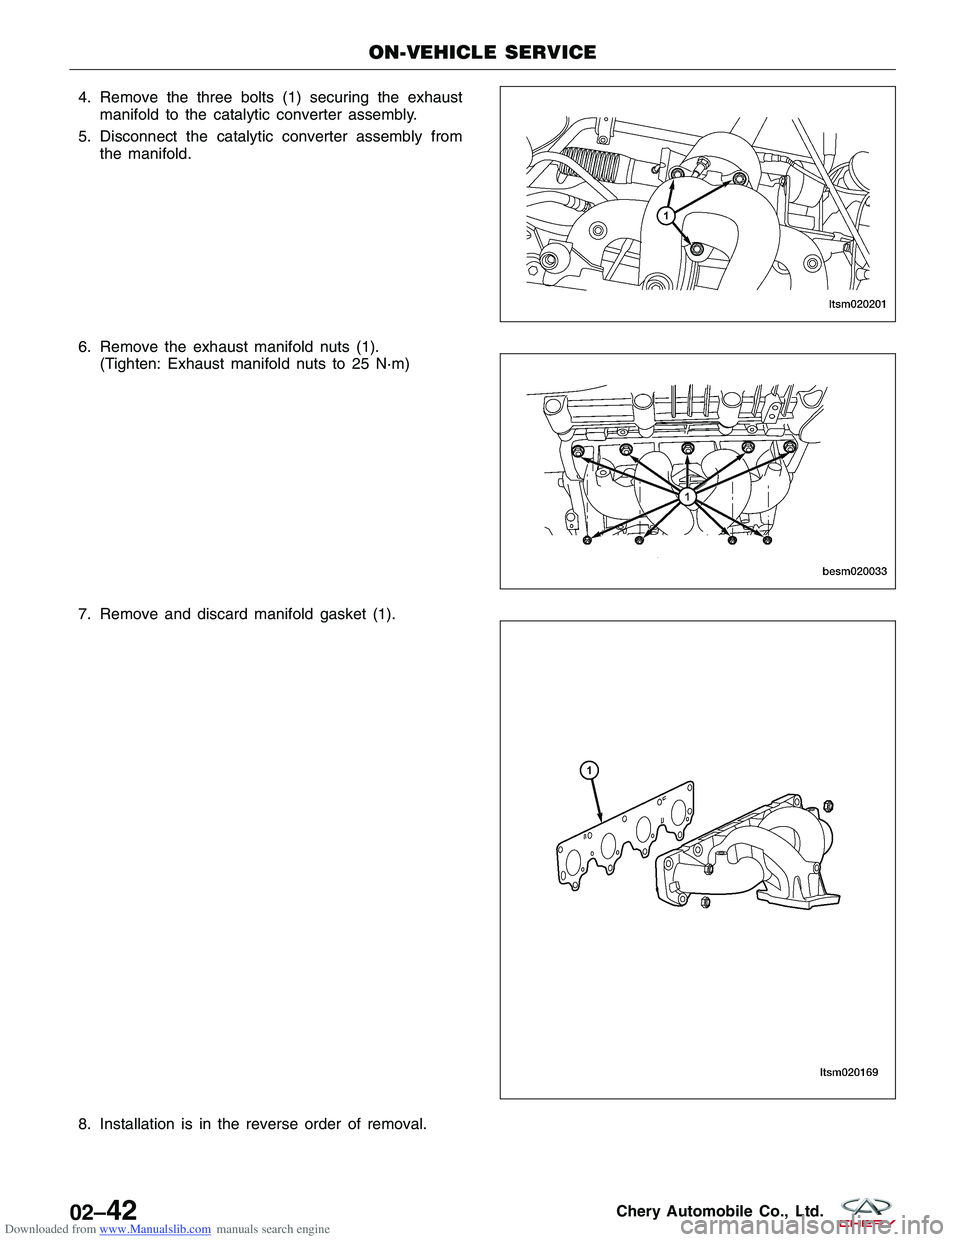 CHERY TIGGO 2009  Service Repair Manual Downloaded from www.Manualslib.com manuals search engine 4. Remove the three bolts (1) securing the exhaustmanifold to the catalytic converter assembly.
5. Disconnect the catalytic converter assembly 